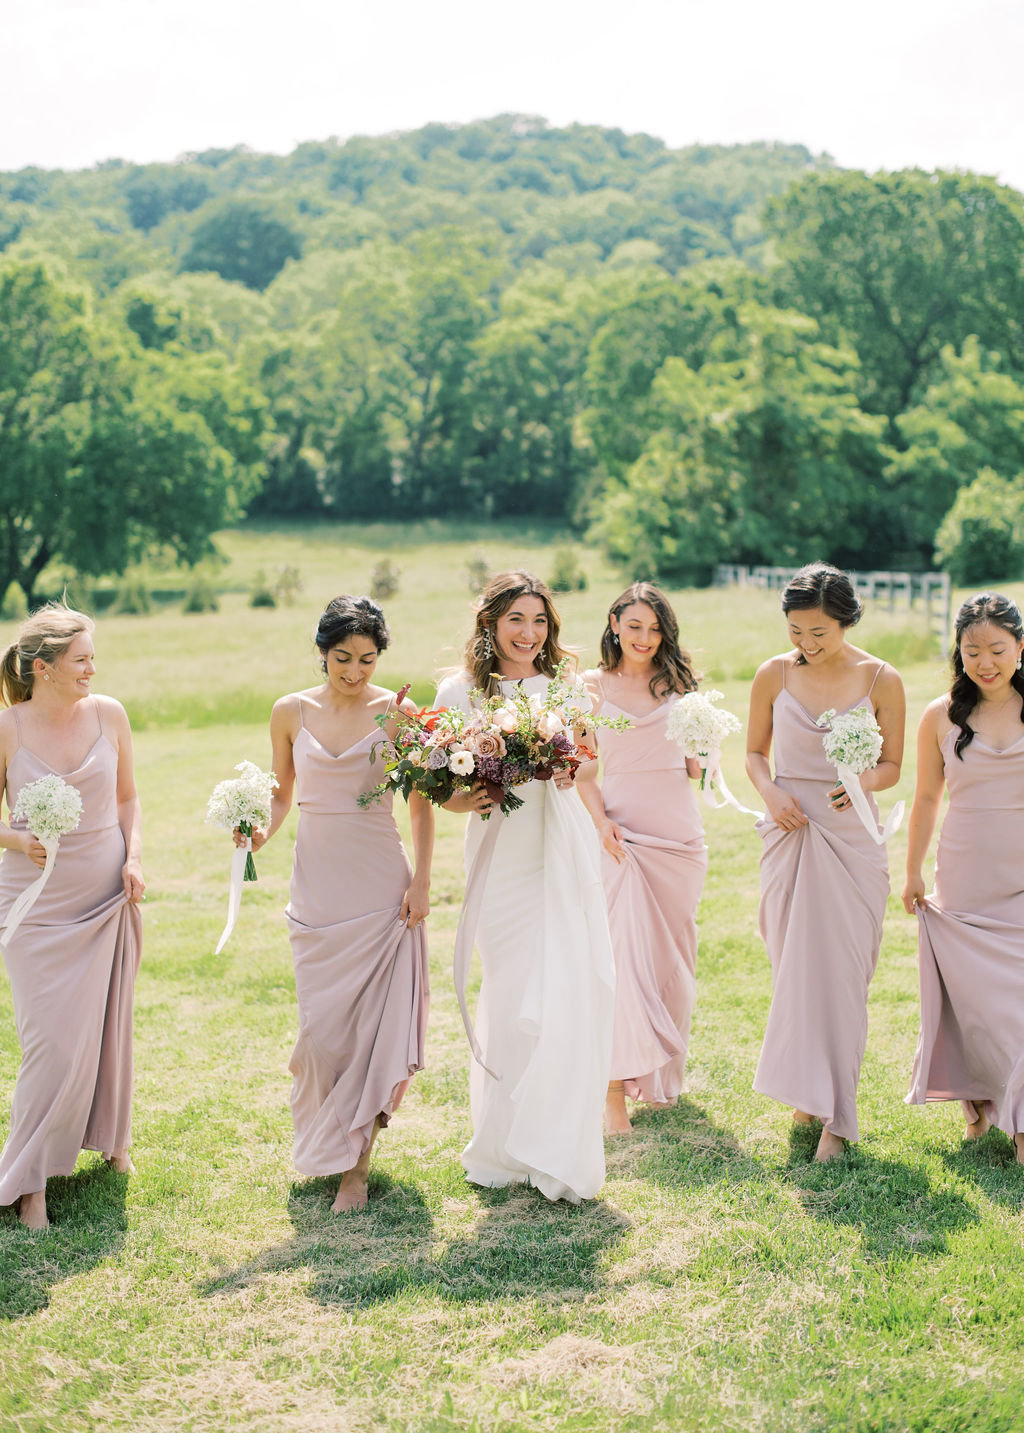 Gradient and Hue Spring Bridal Party Flowers in Hues of Lilac